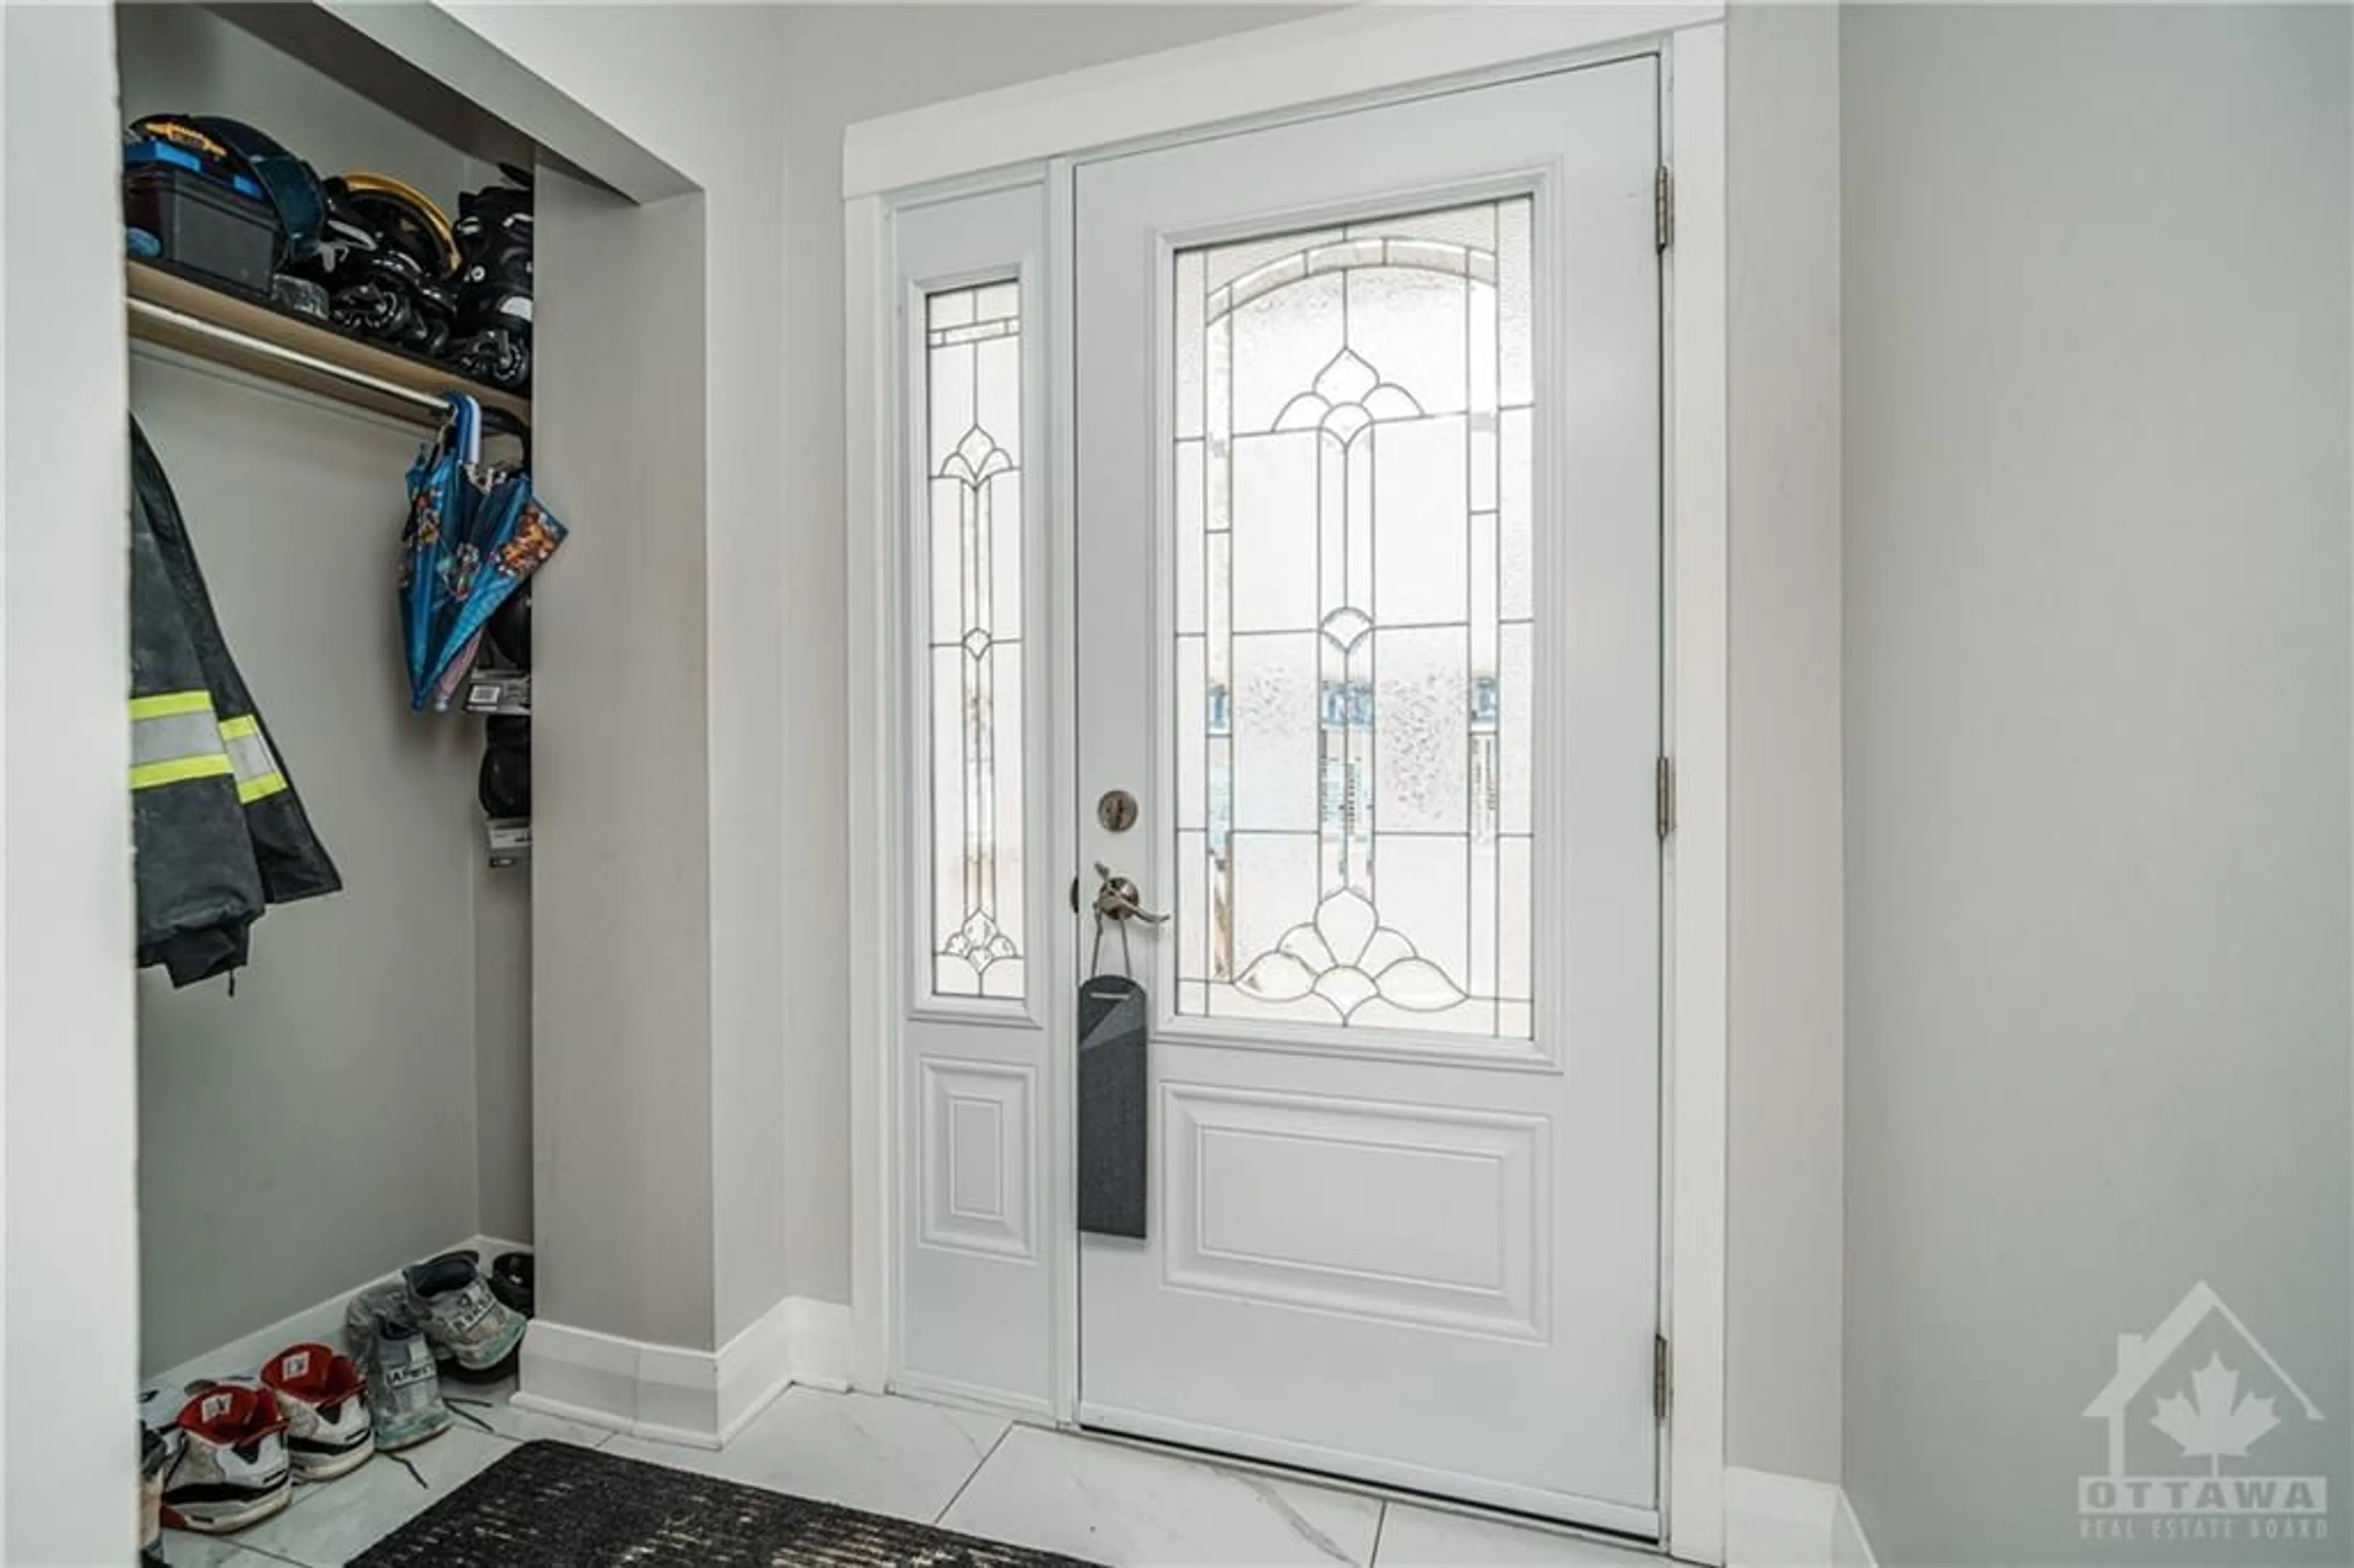 Indoor entryway for 374 POULIN Ave, Ottawa Ontario K2B 5V3